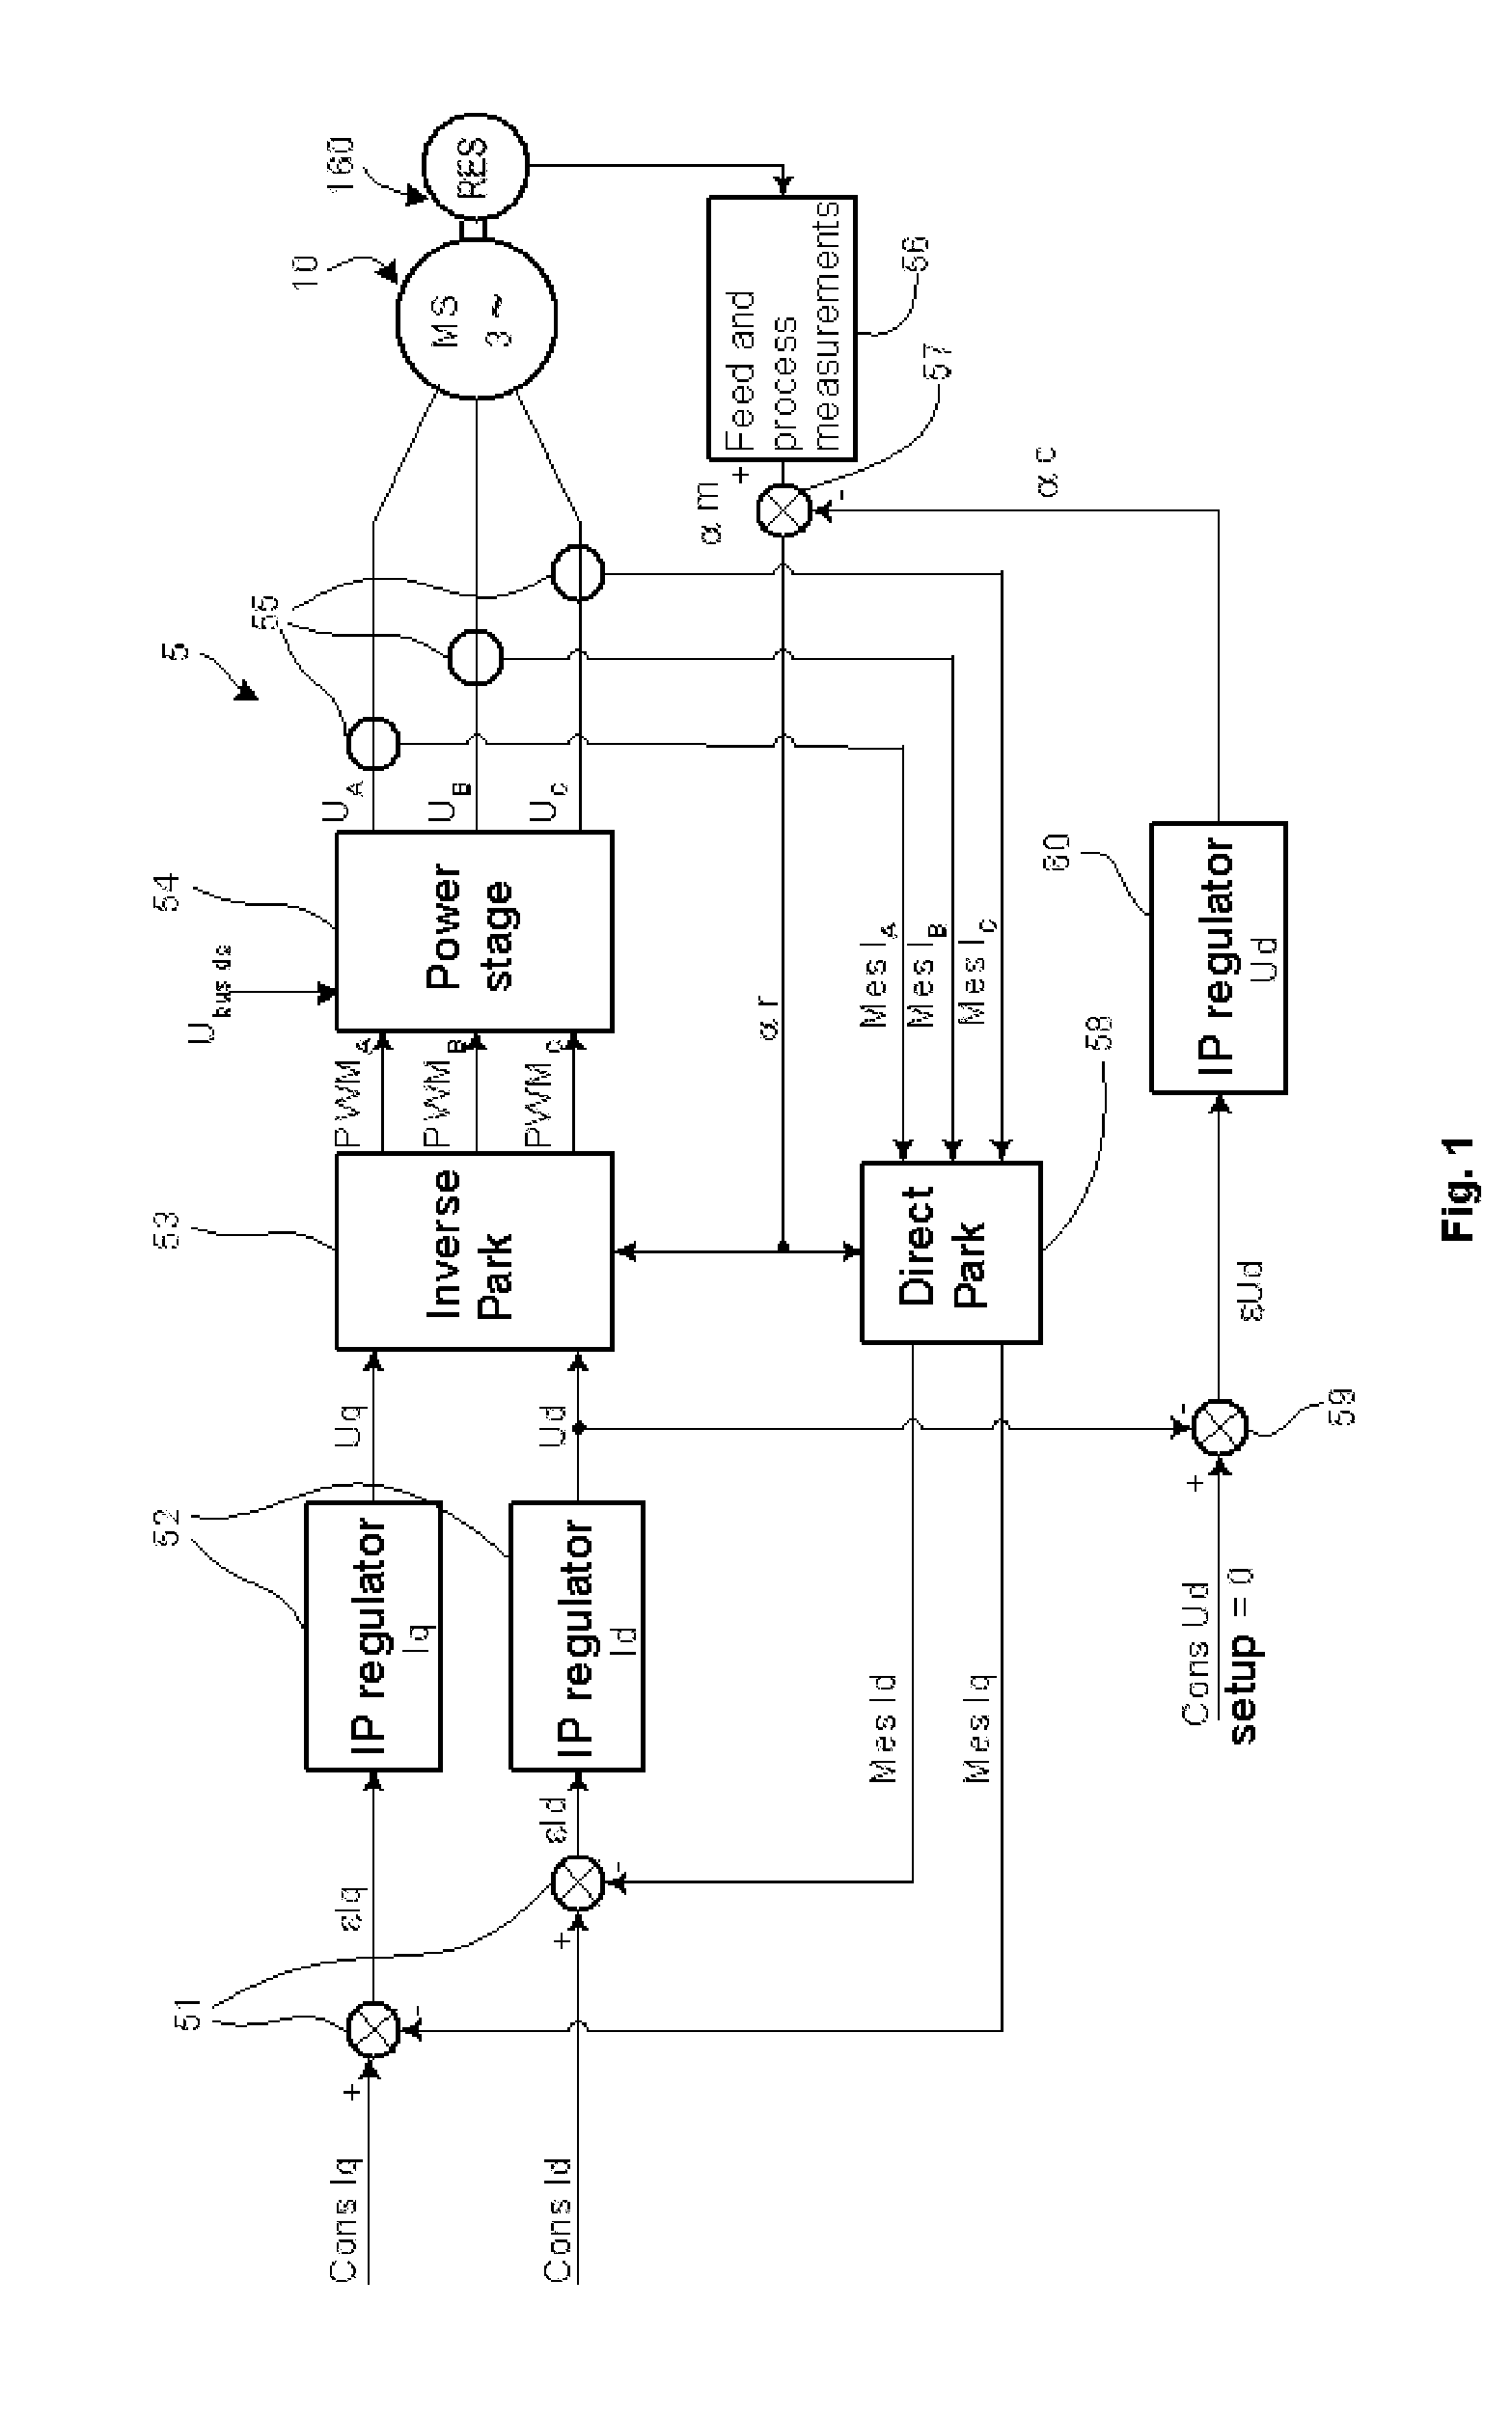 Equipment and method for measuring the offset angle of a resolver in a synchronous electric machine